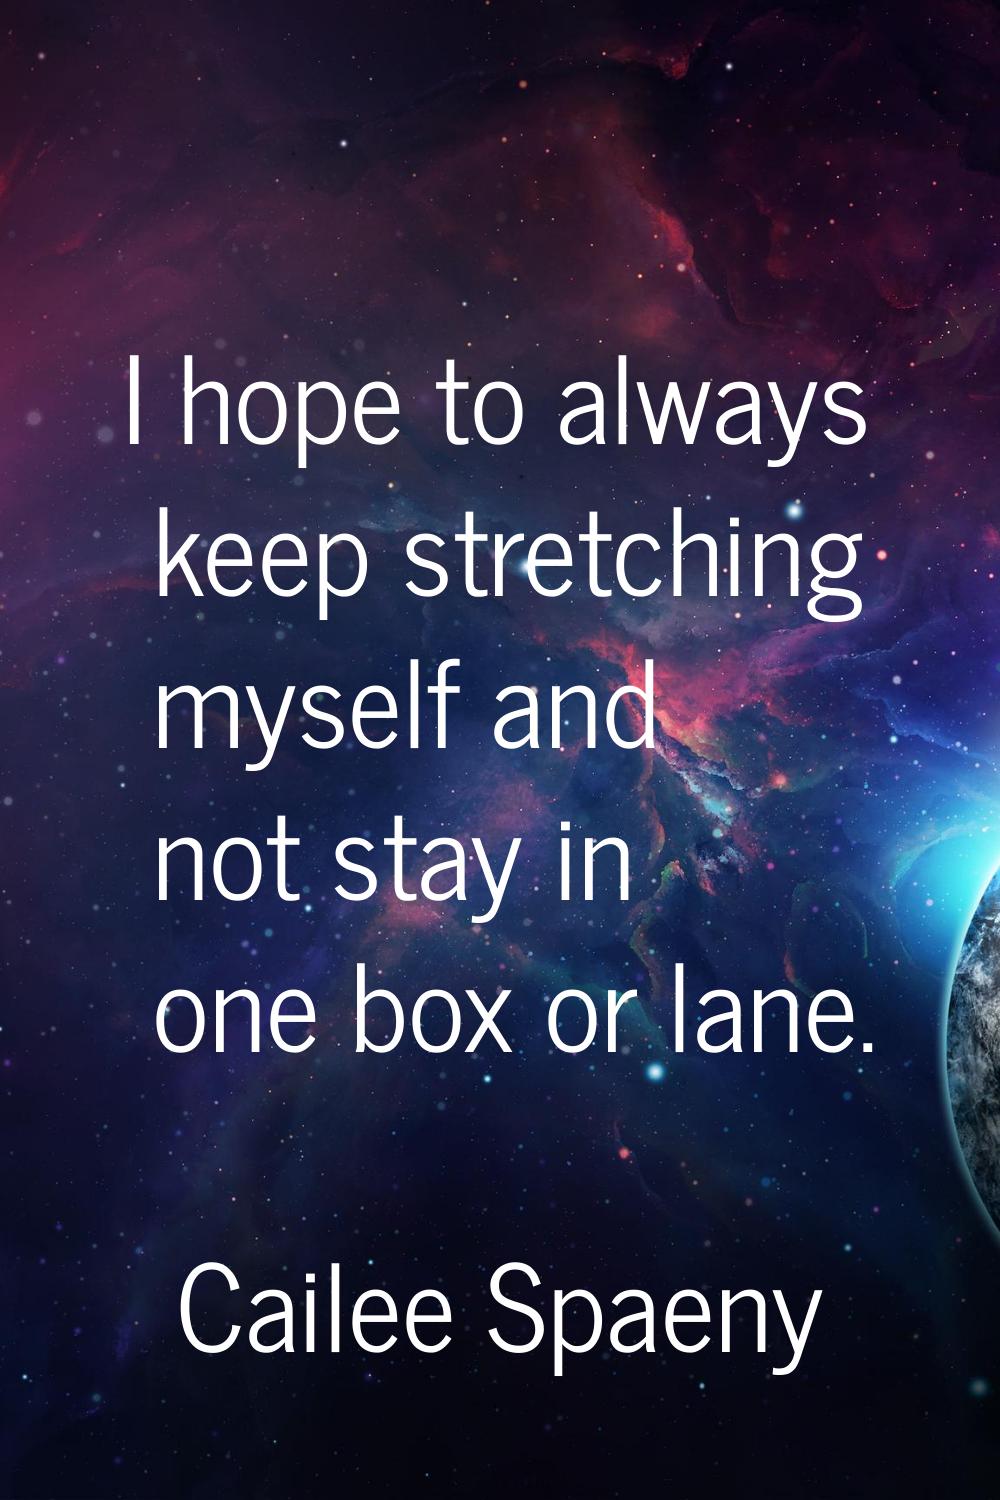 I hope to always keep stretching myself and not stay in one box or lane.